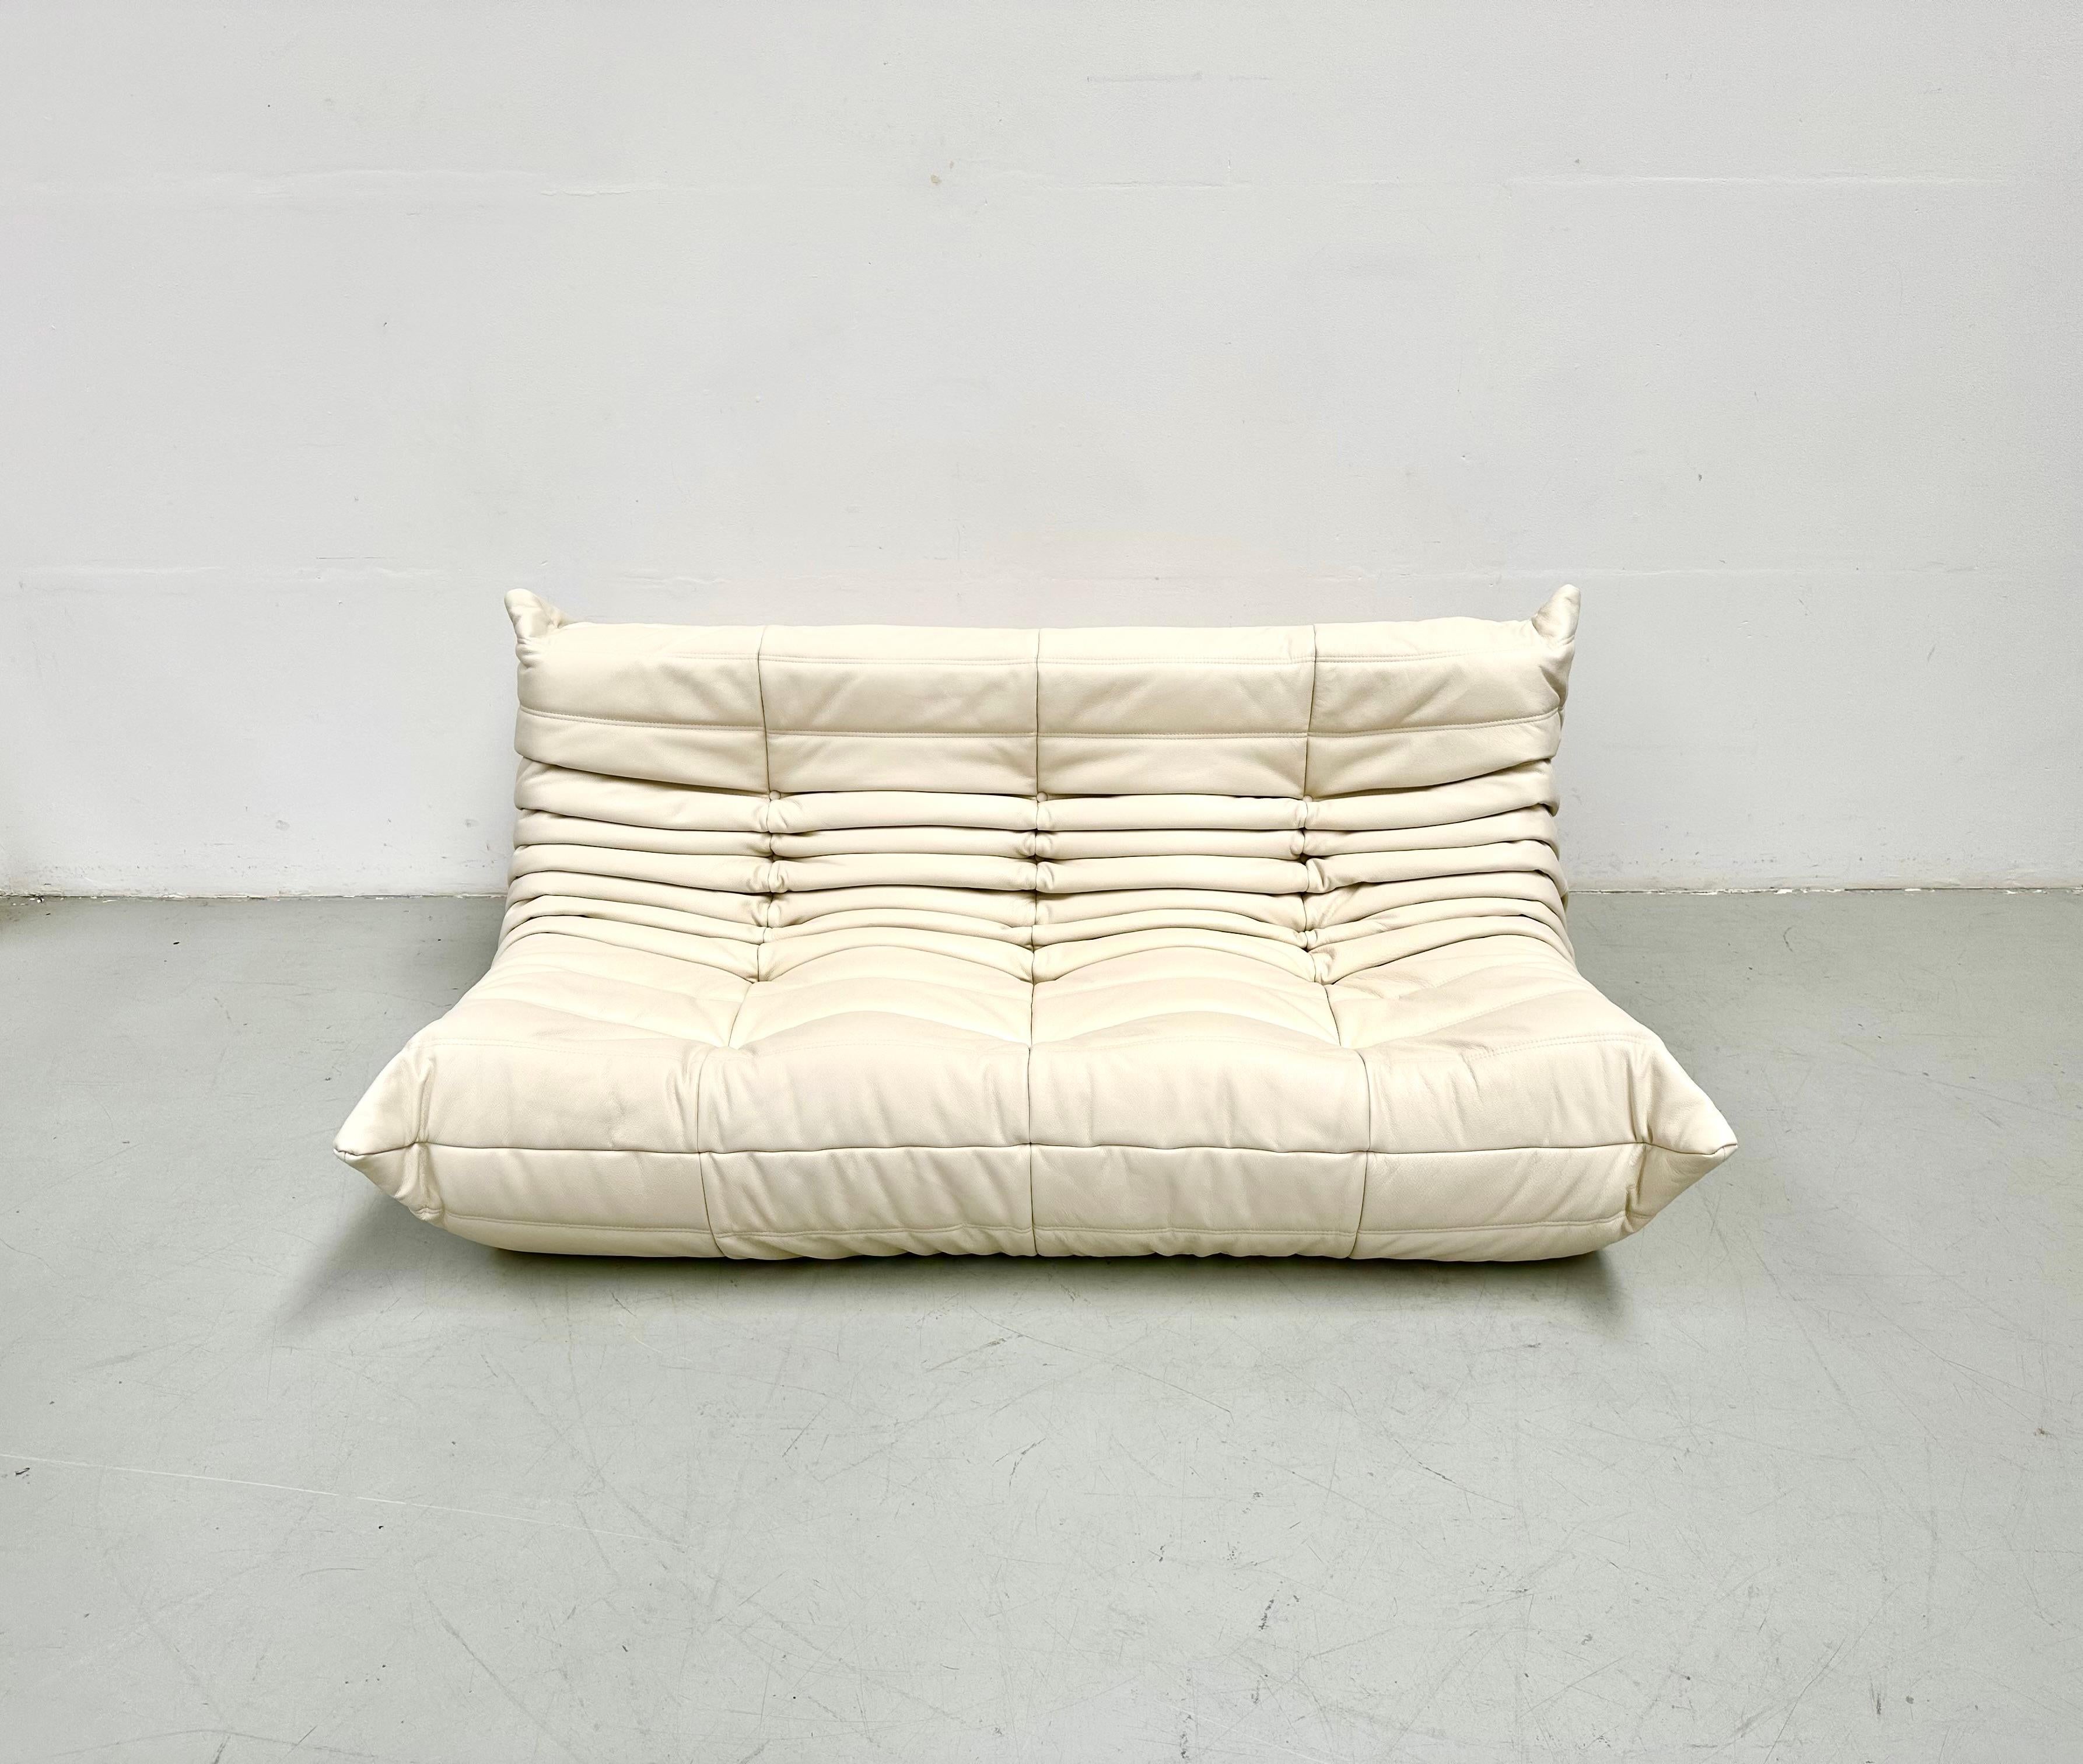 French Vintage Togo Sofa in White Leather by Michel Ducaroy for Ligne Roset. 2